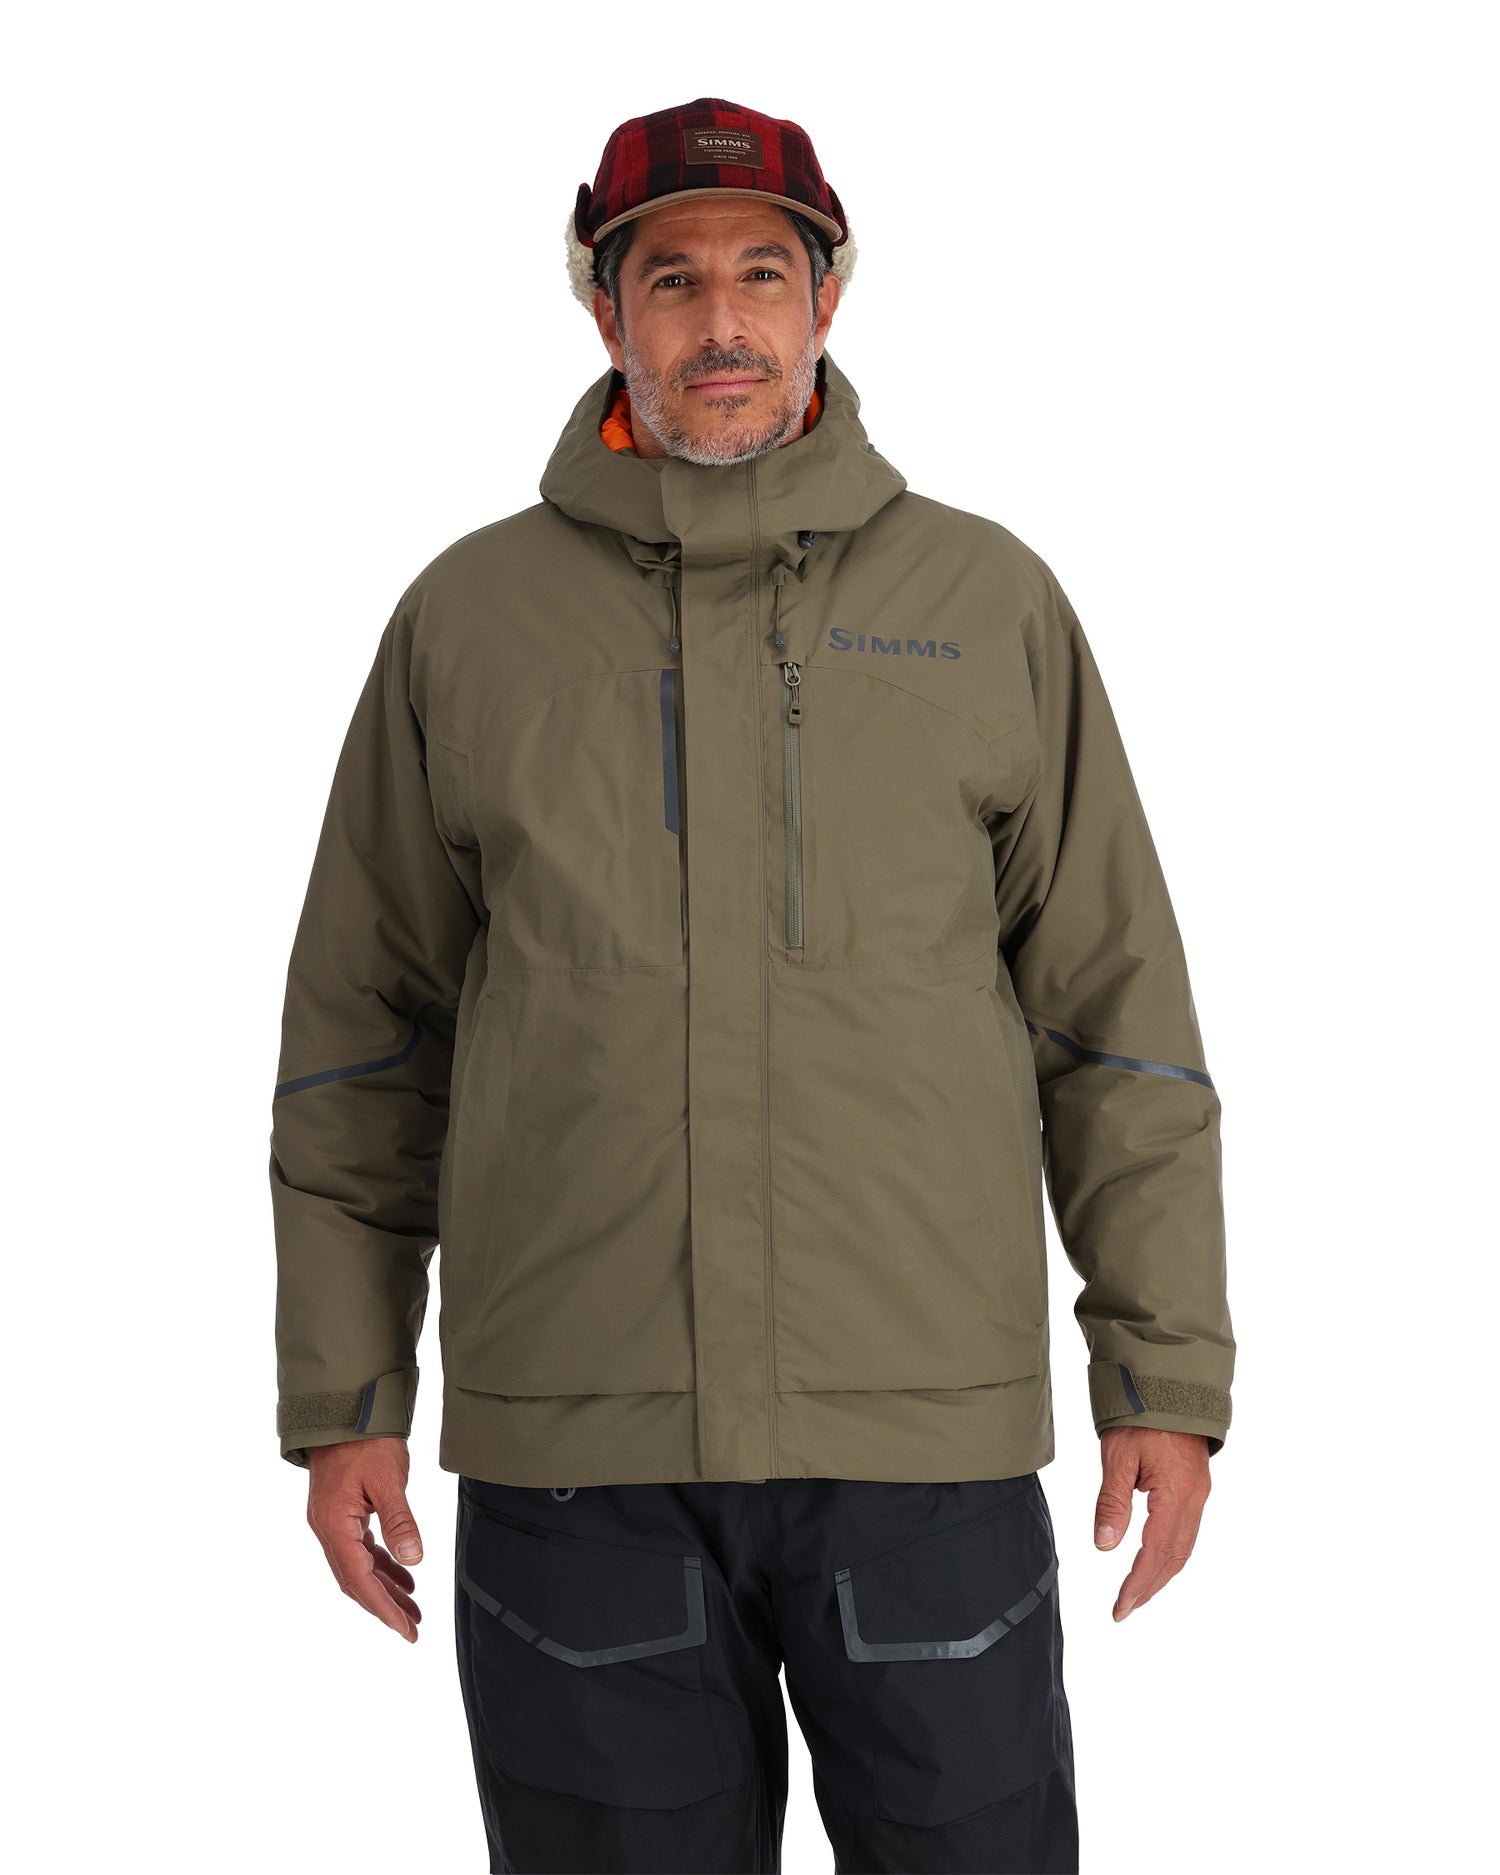 13865-781-simms-challenger-insulated-jacket-model